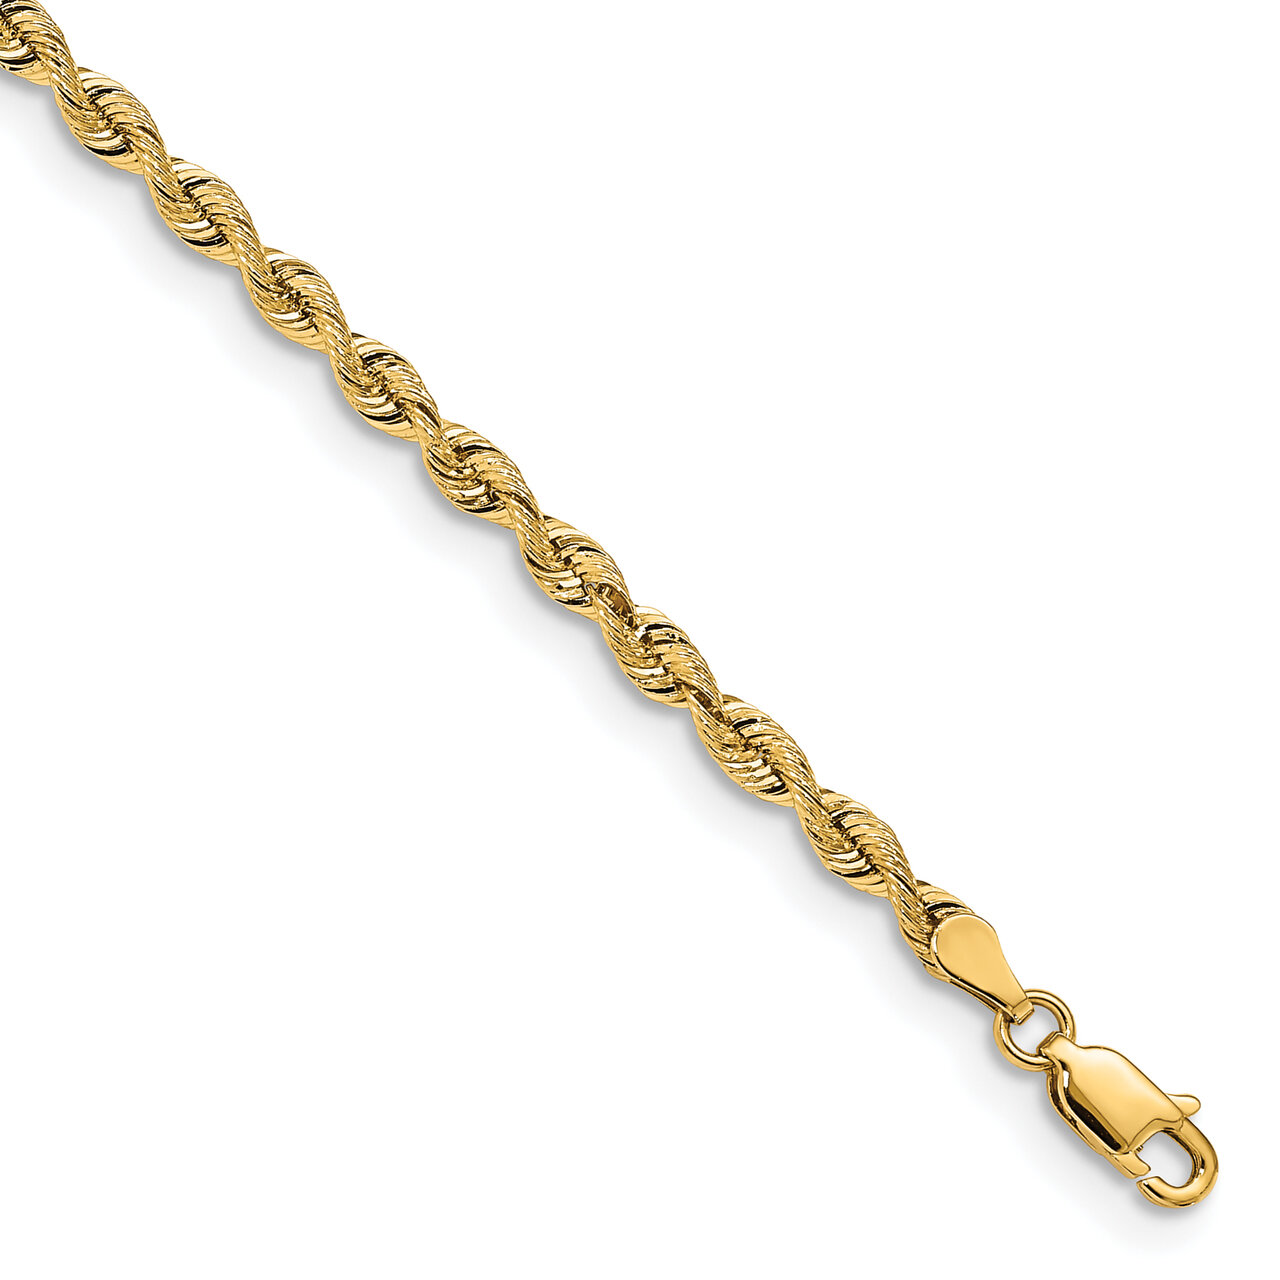 8 Inch 3.25mm Silky Rope Chain 14k Yellow Gold SKR025-8